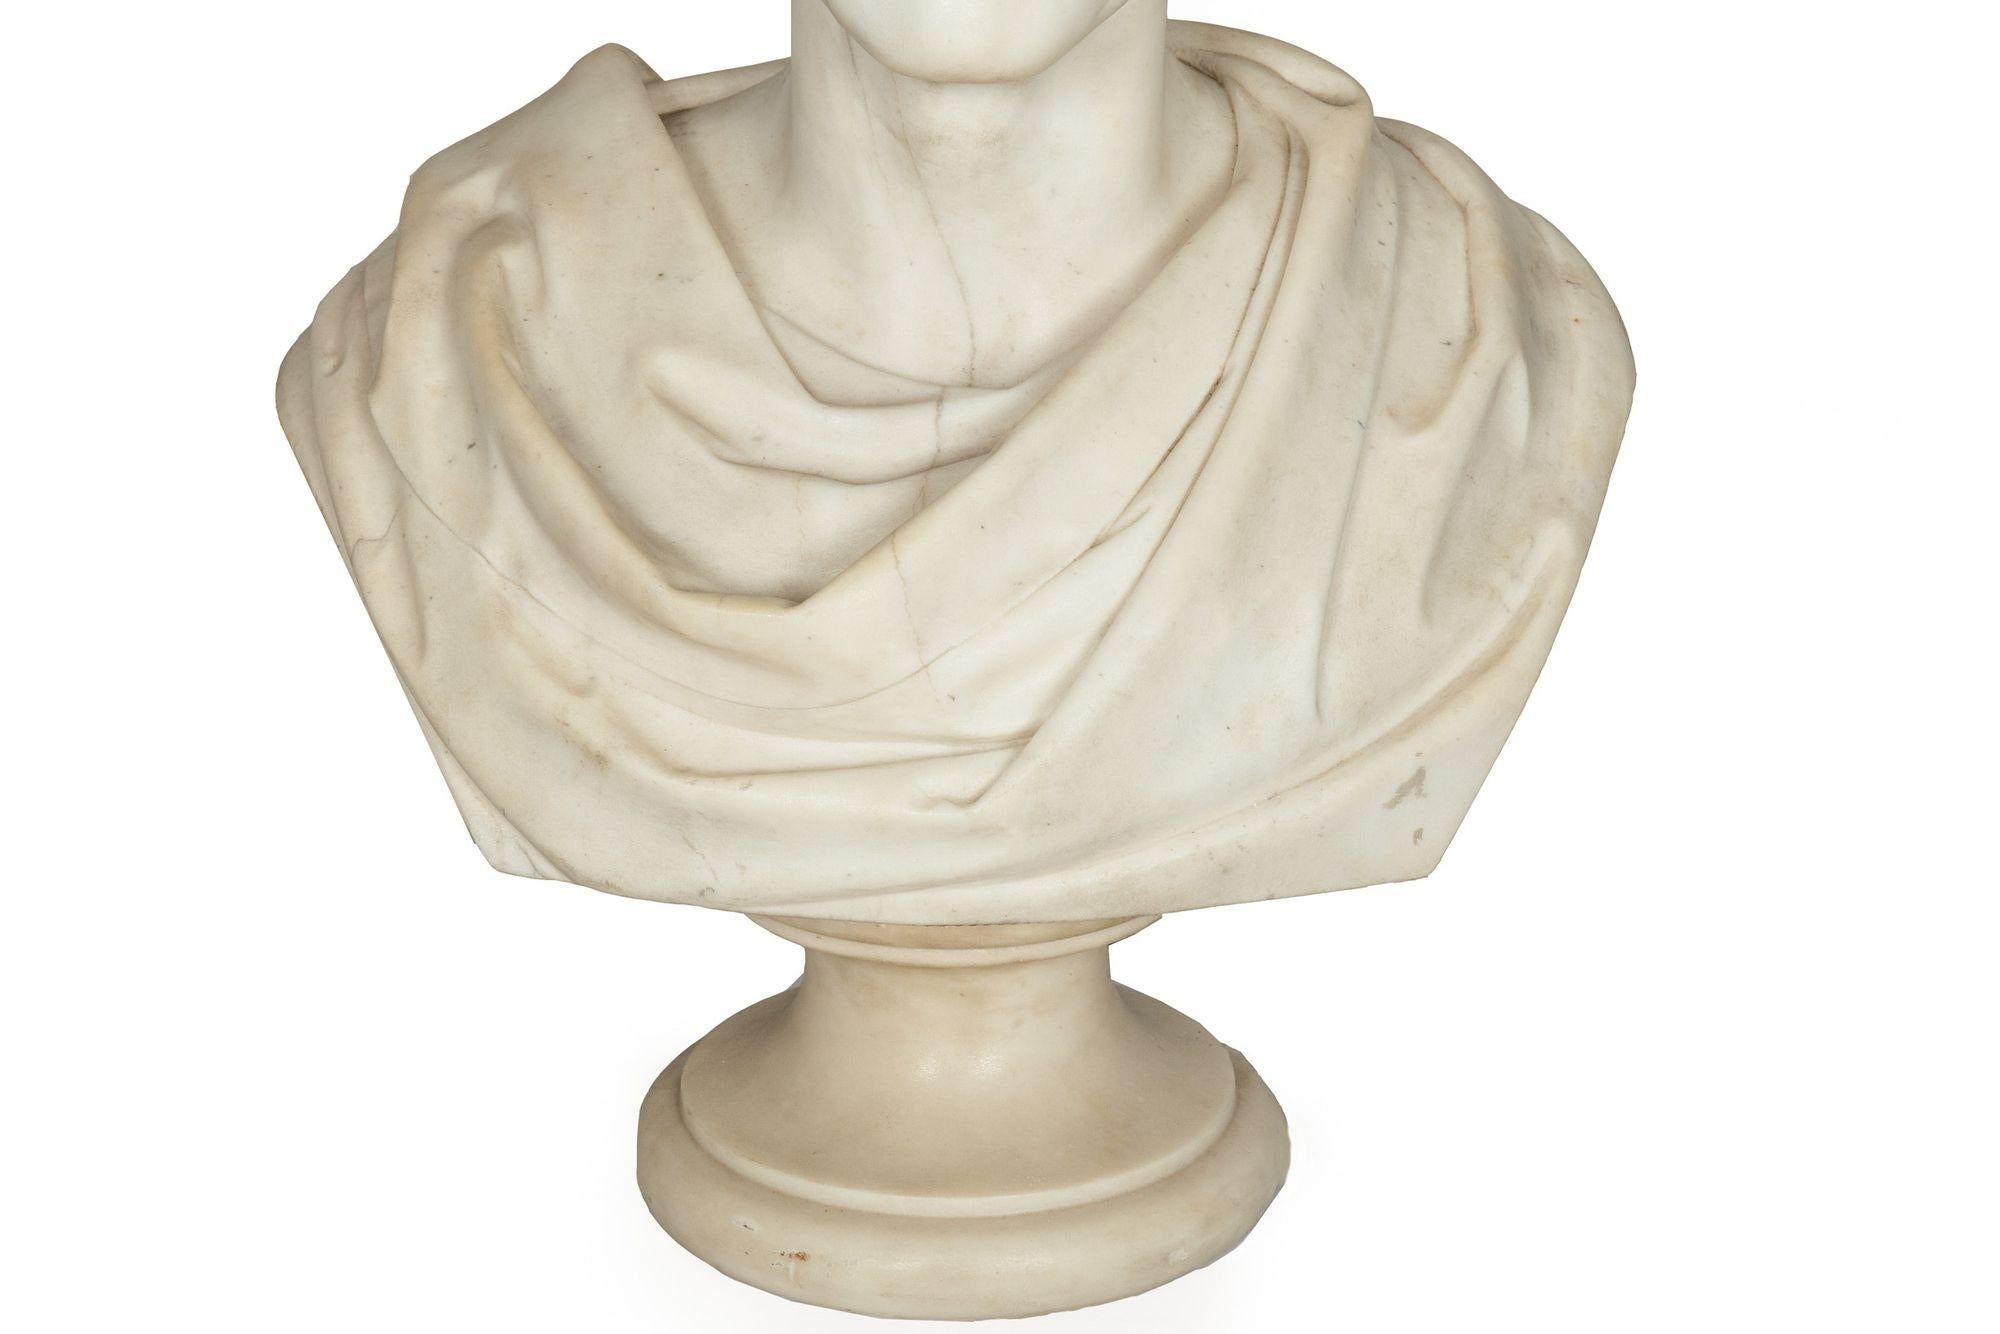 19th Century Carrara Marble Bust Sculpture of Classical Statesman For Sale 4